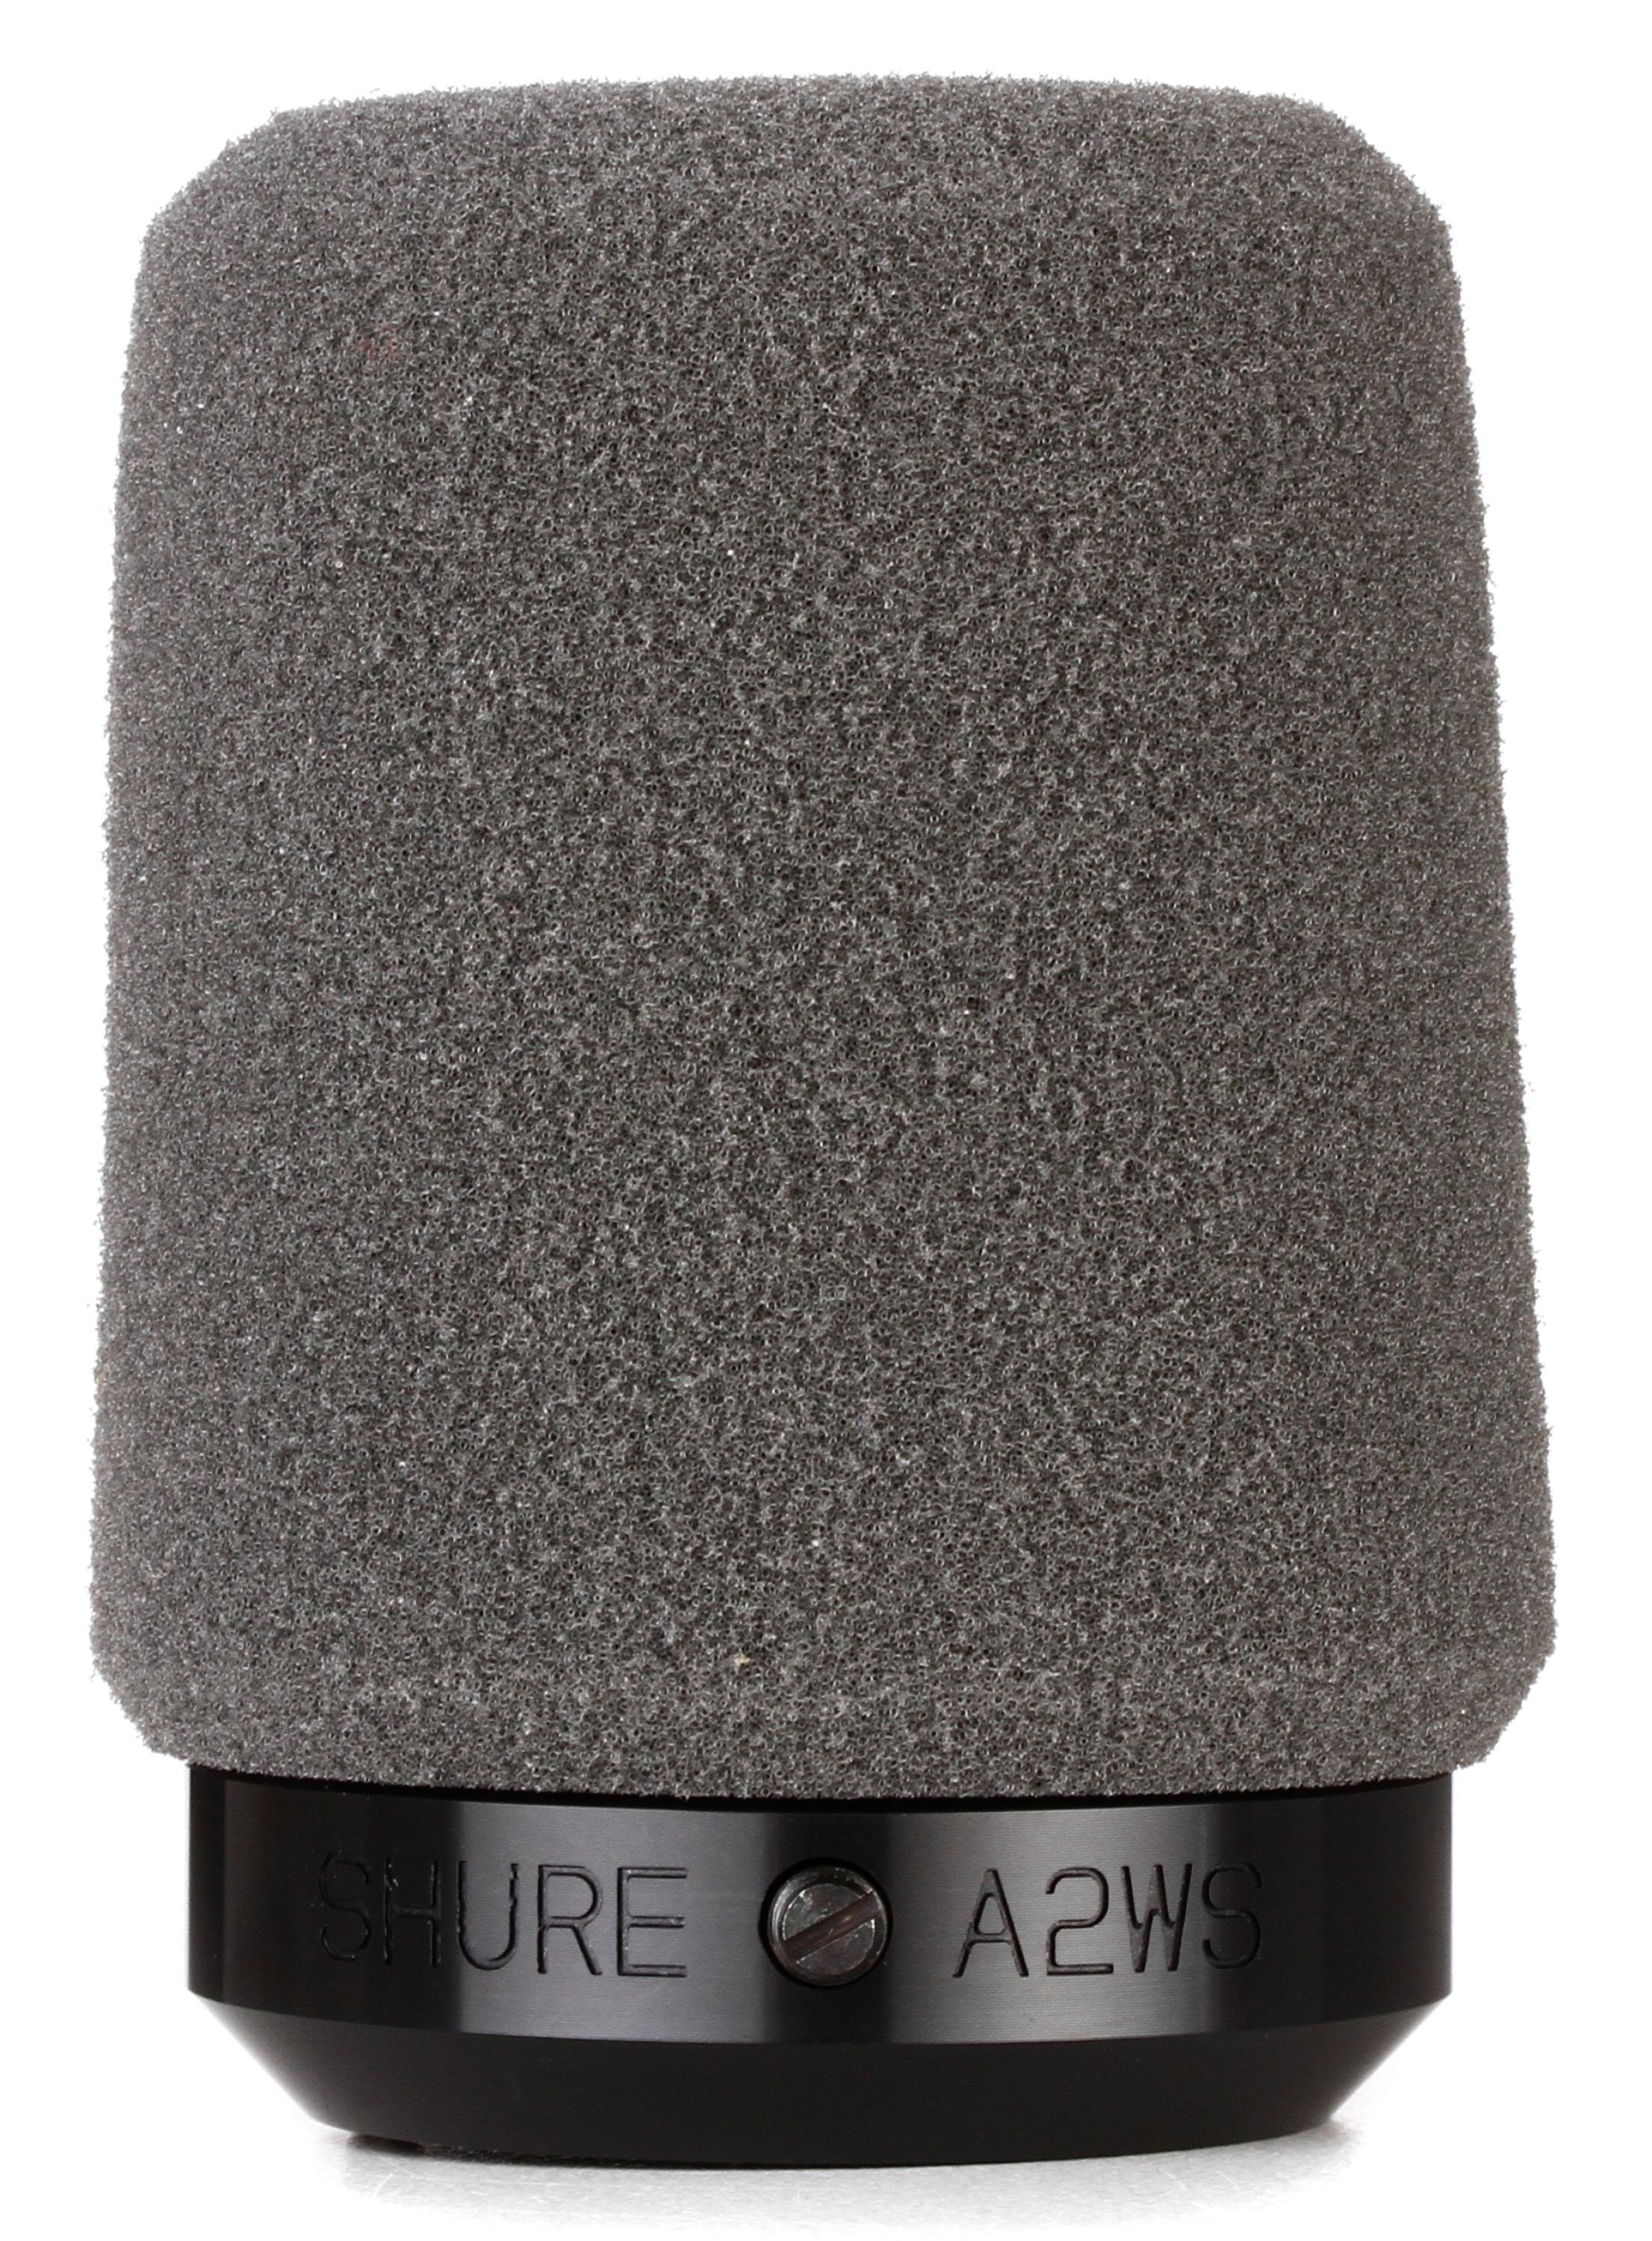 Used Shure SM57 Cardioid Dynamic Microphone + Shure A2WS Windscreen -  Simpson Advanced Chiropractic & Medical Center